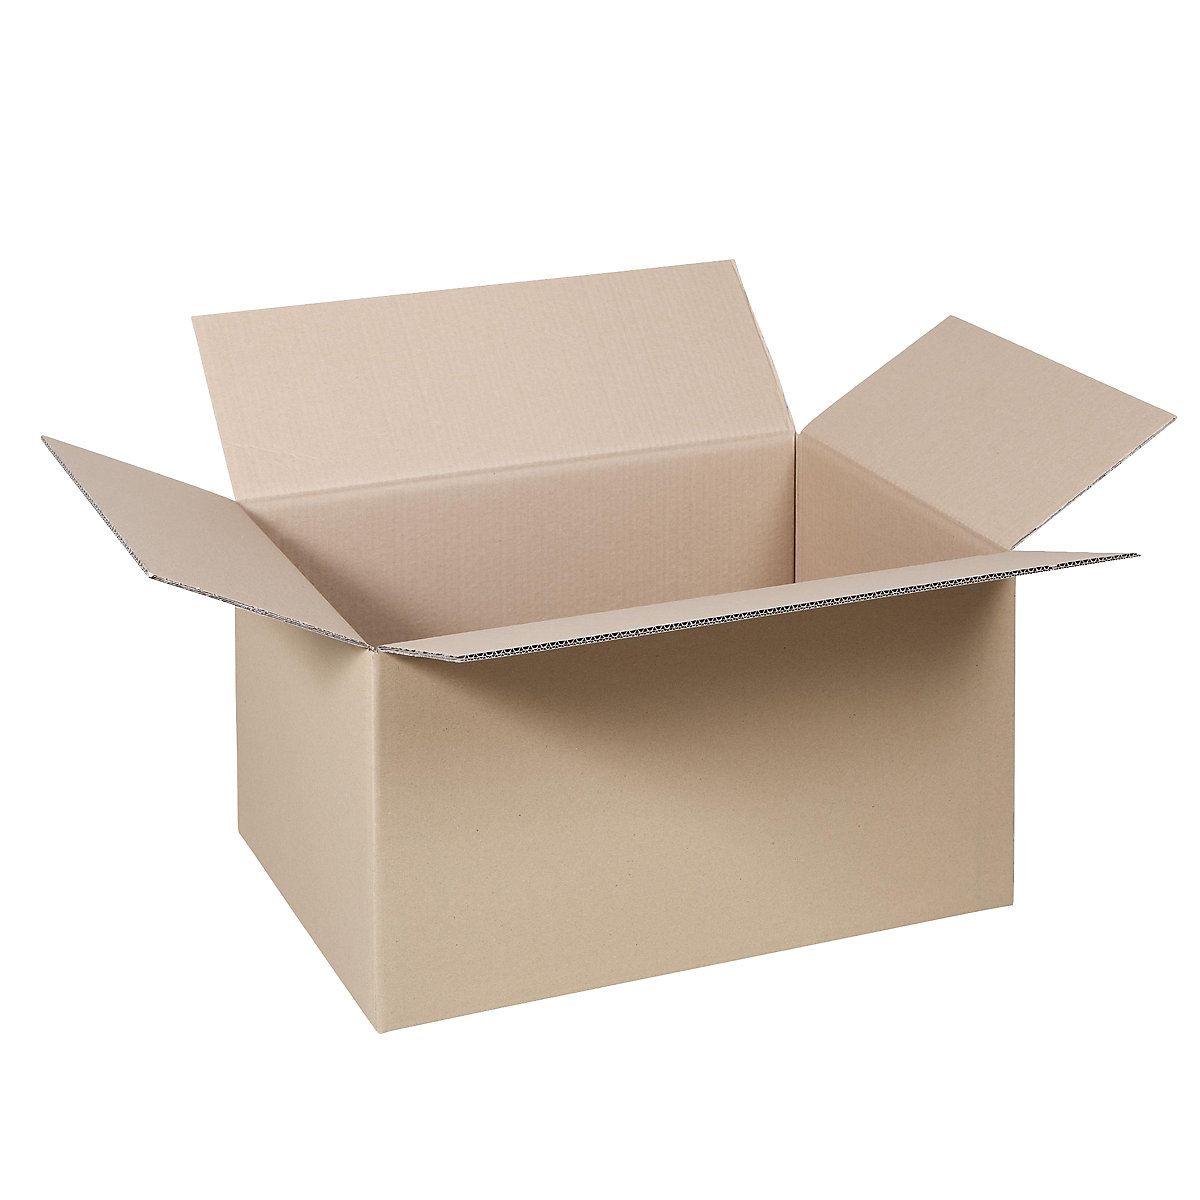 Folding cardboard box, FEFCO 0201, made of double fluted cardboard, internal dimensions 500 x 300 x 300 mm, pack of 50-53